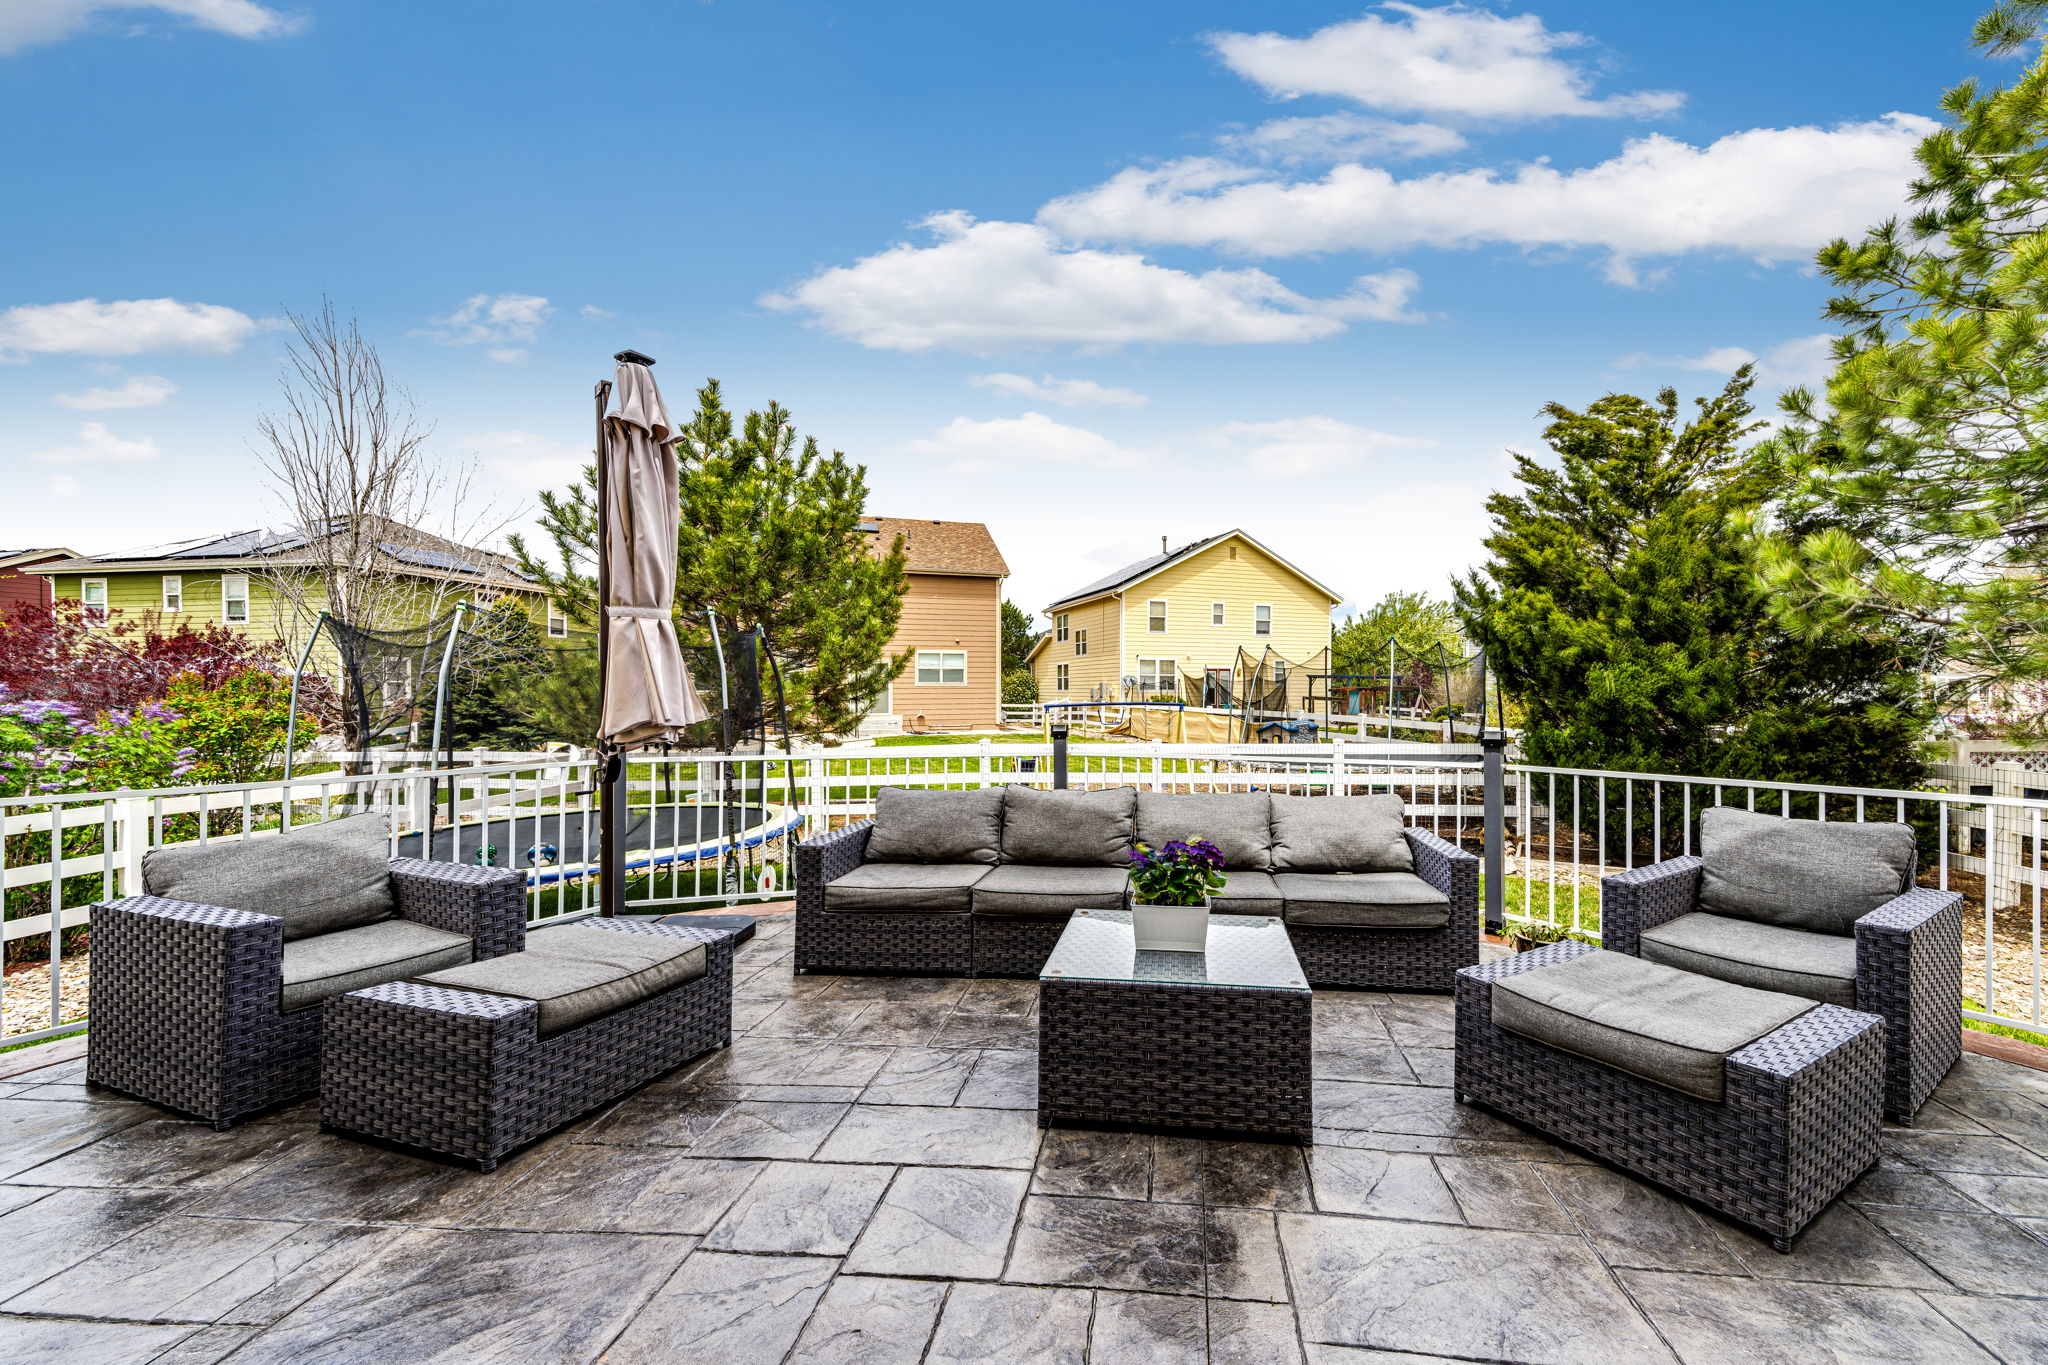 Enjoy relaxing on your stamped concrete backyard patio area